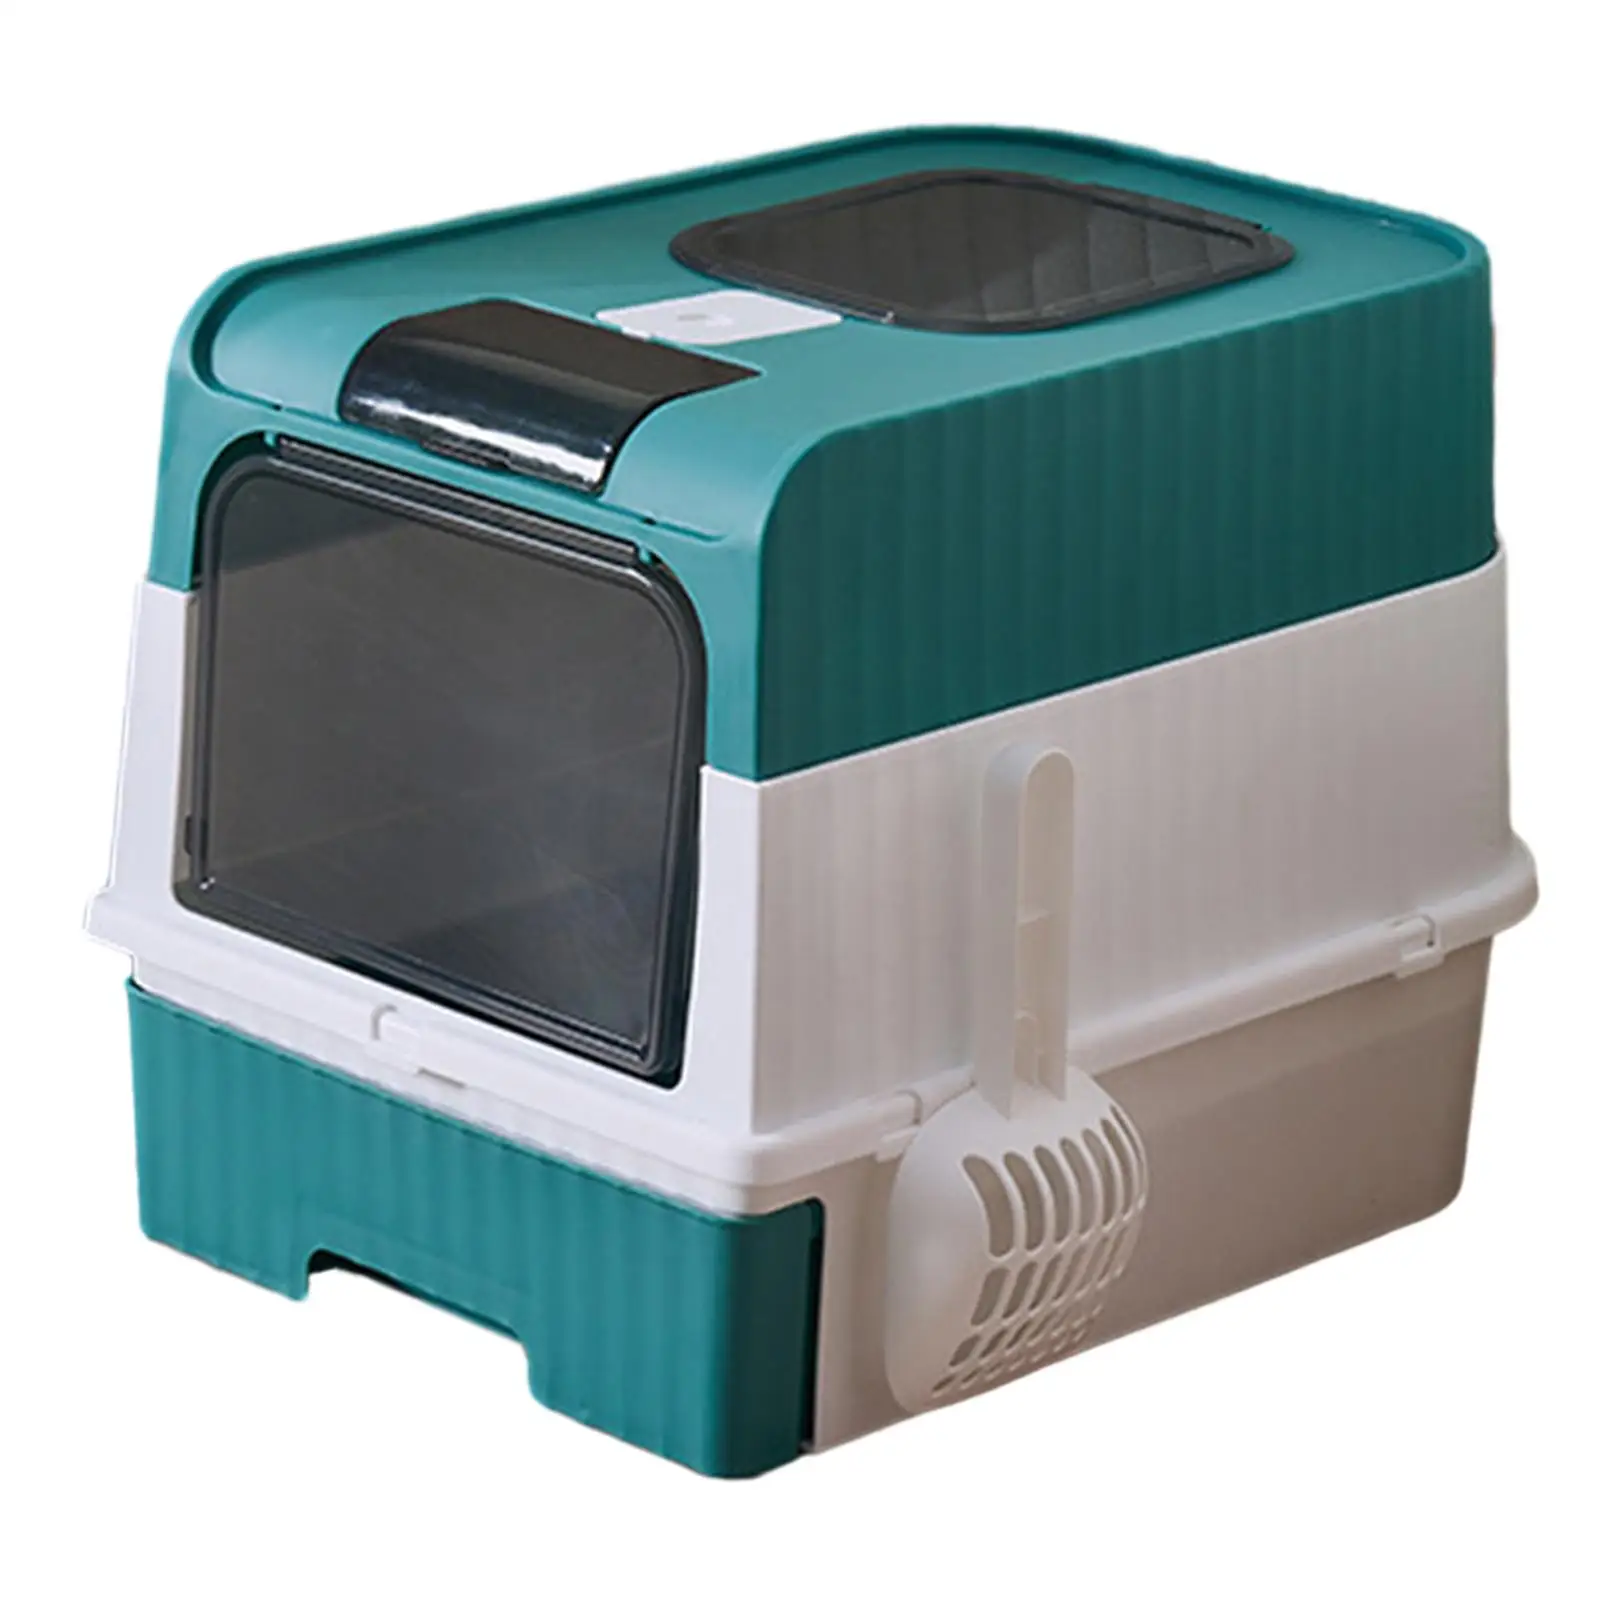 Hooded Cat Litter Boxes with Scoop Pet Supplies Removable Cat Litter Tray Durable Easy Access Large Spacious Fully Enclosed